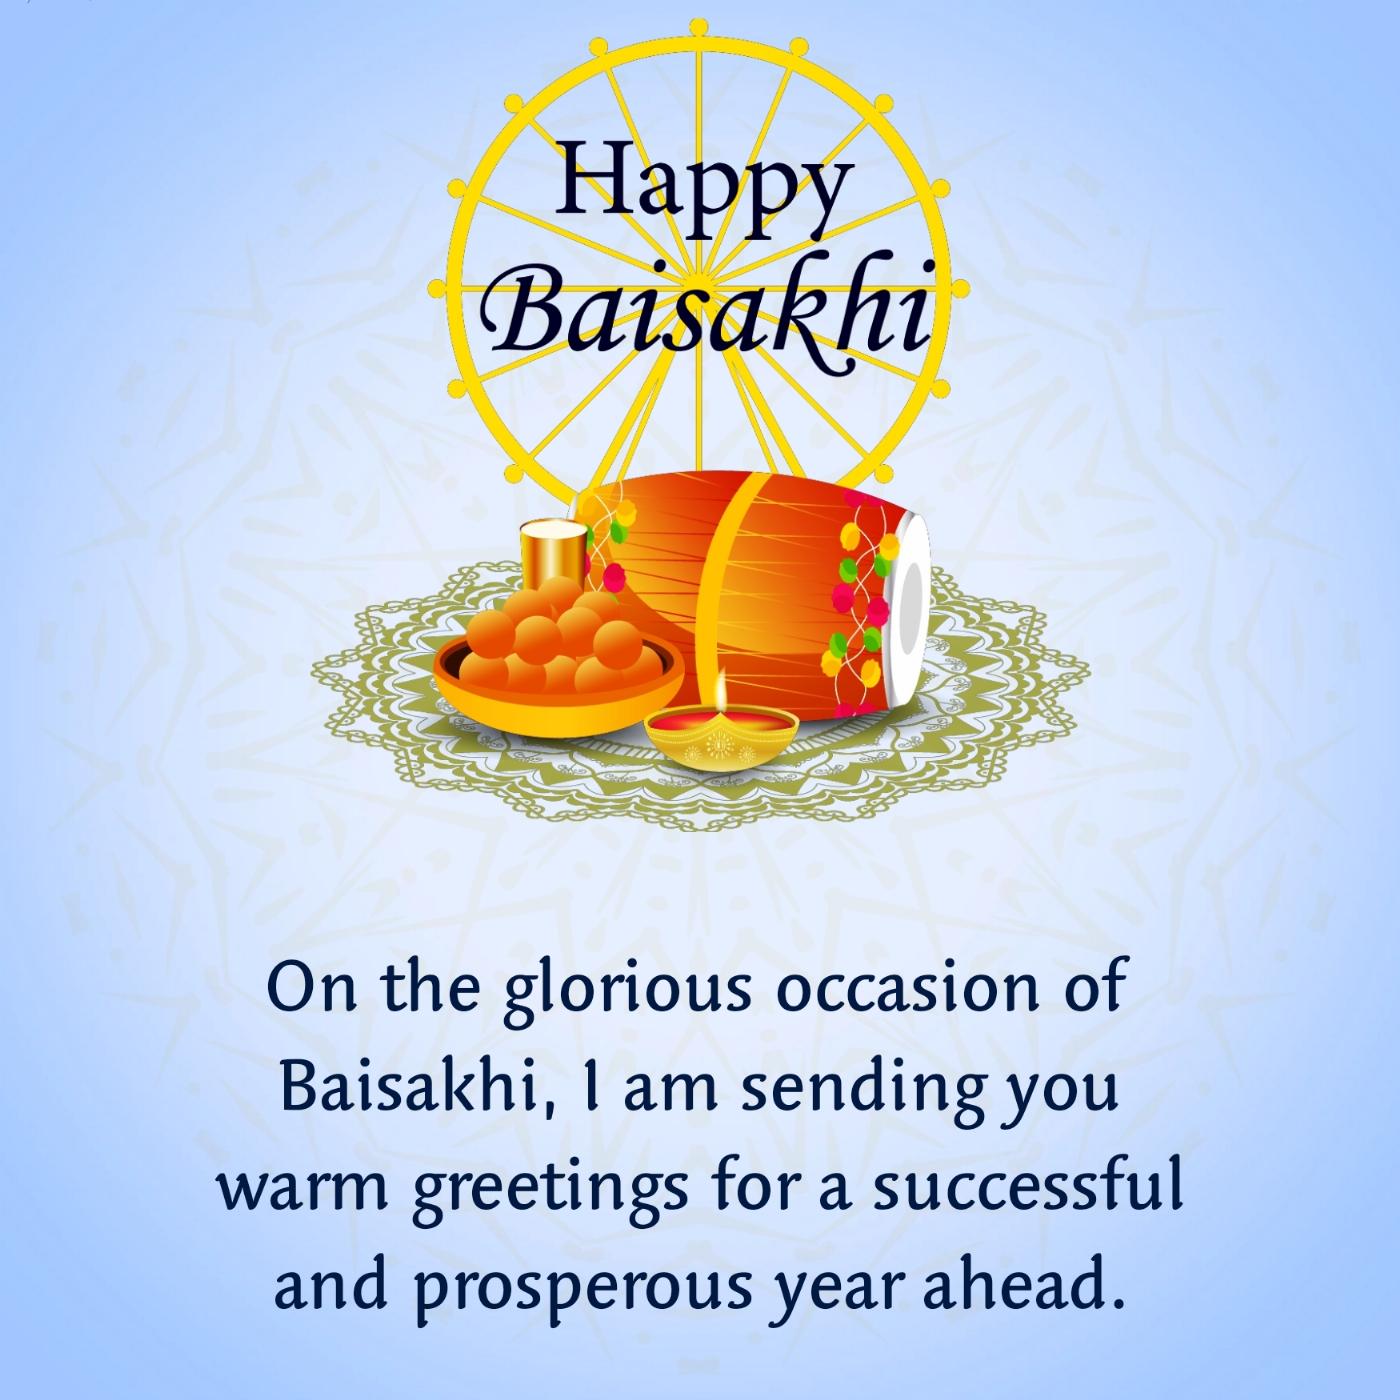 On the glorious occasion of Baisakhi I am sending you warm greetings